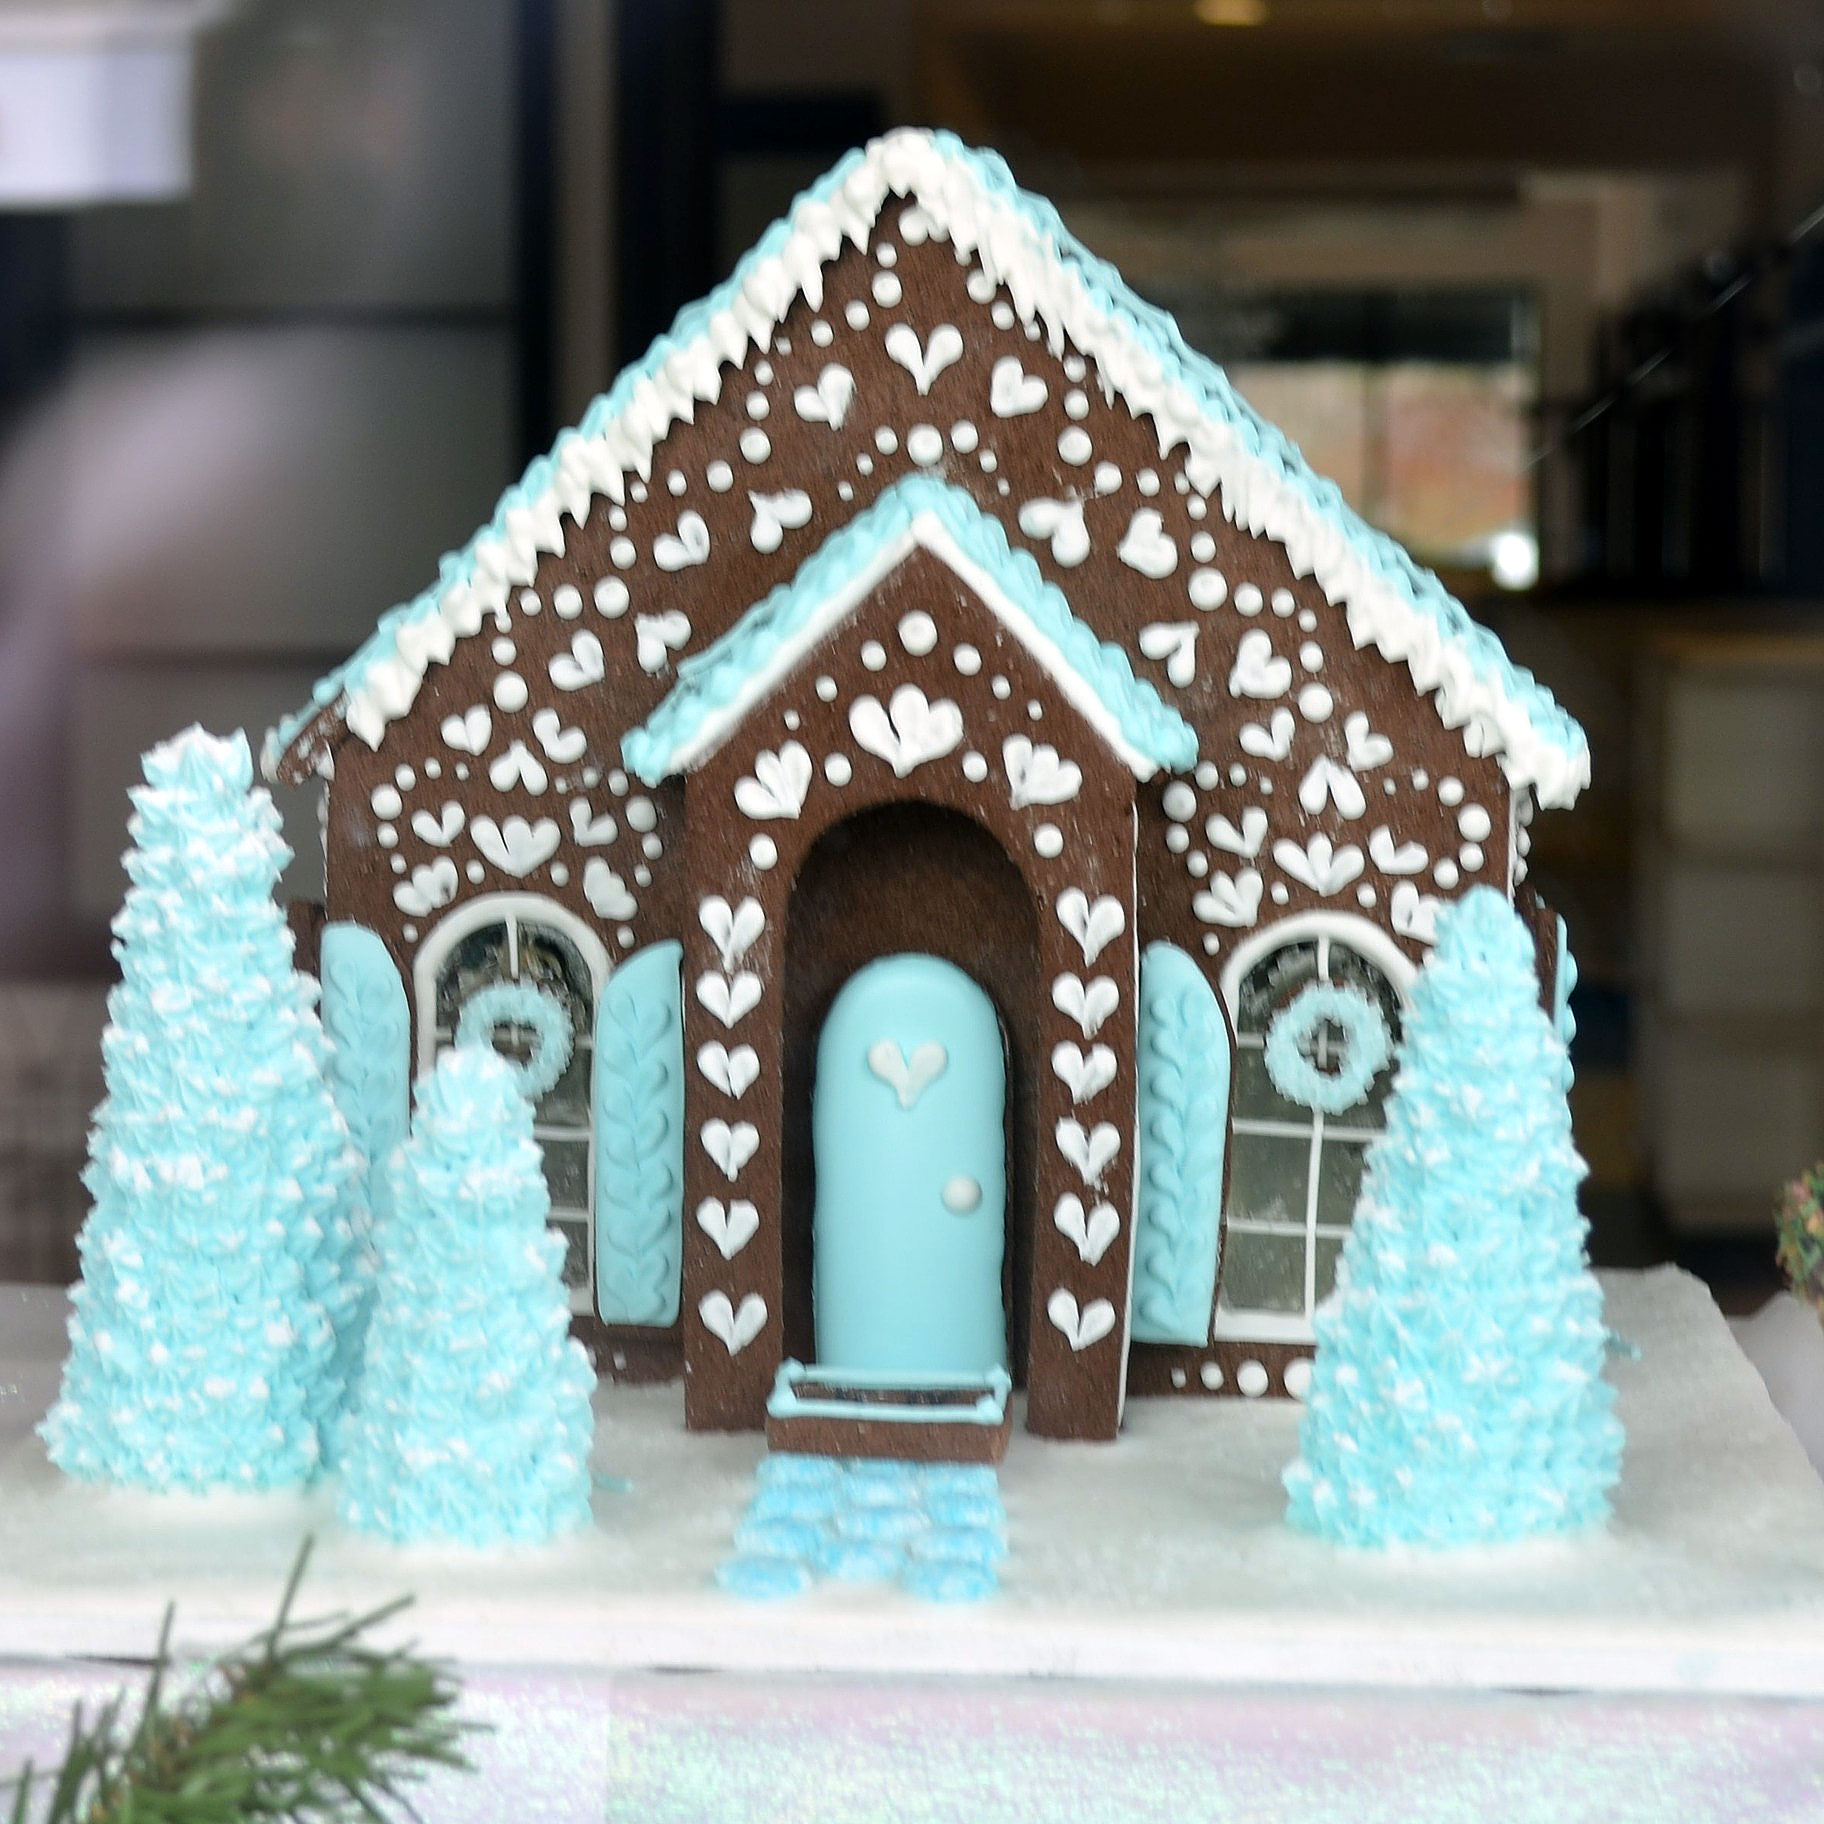 Annual Gingerbread House Festival: Land of Sweets at Wood Memorial Library and Museum